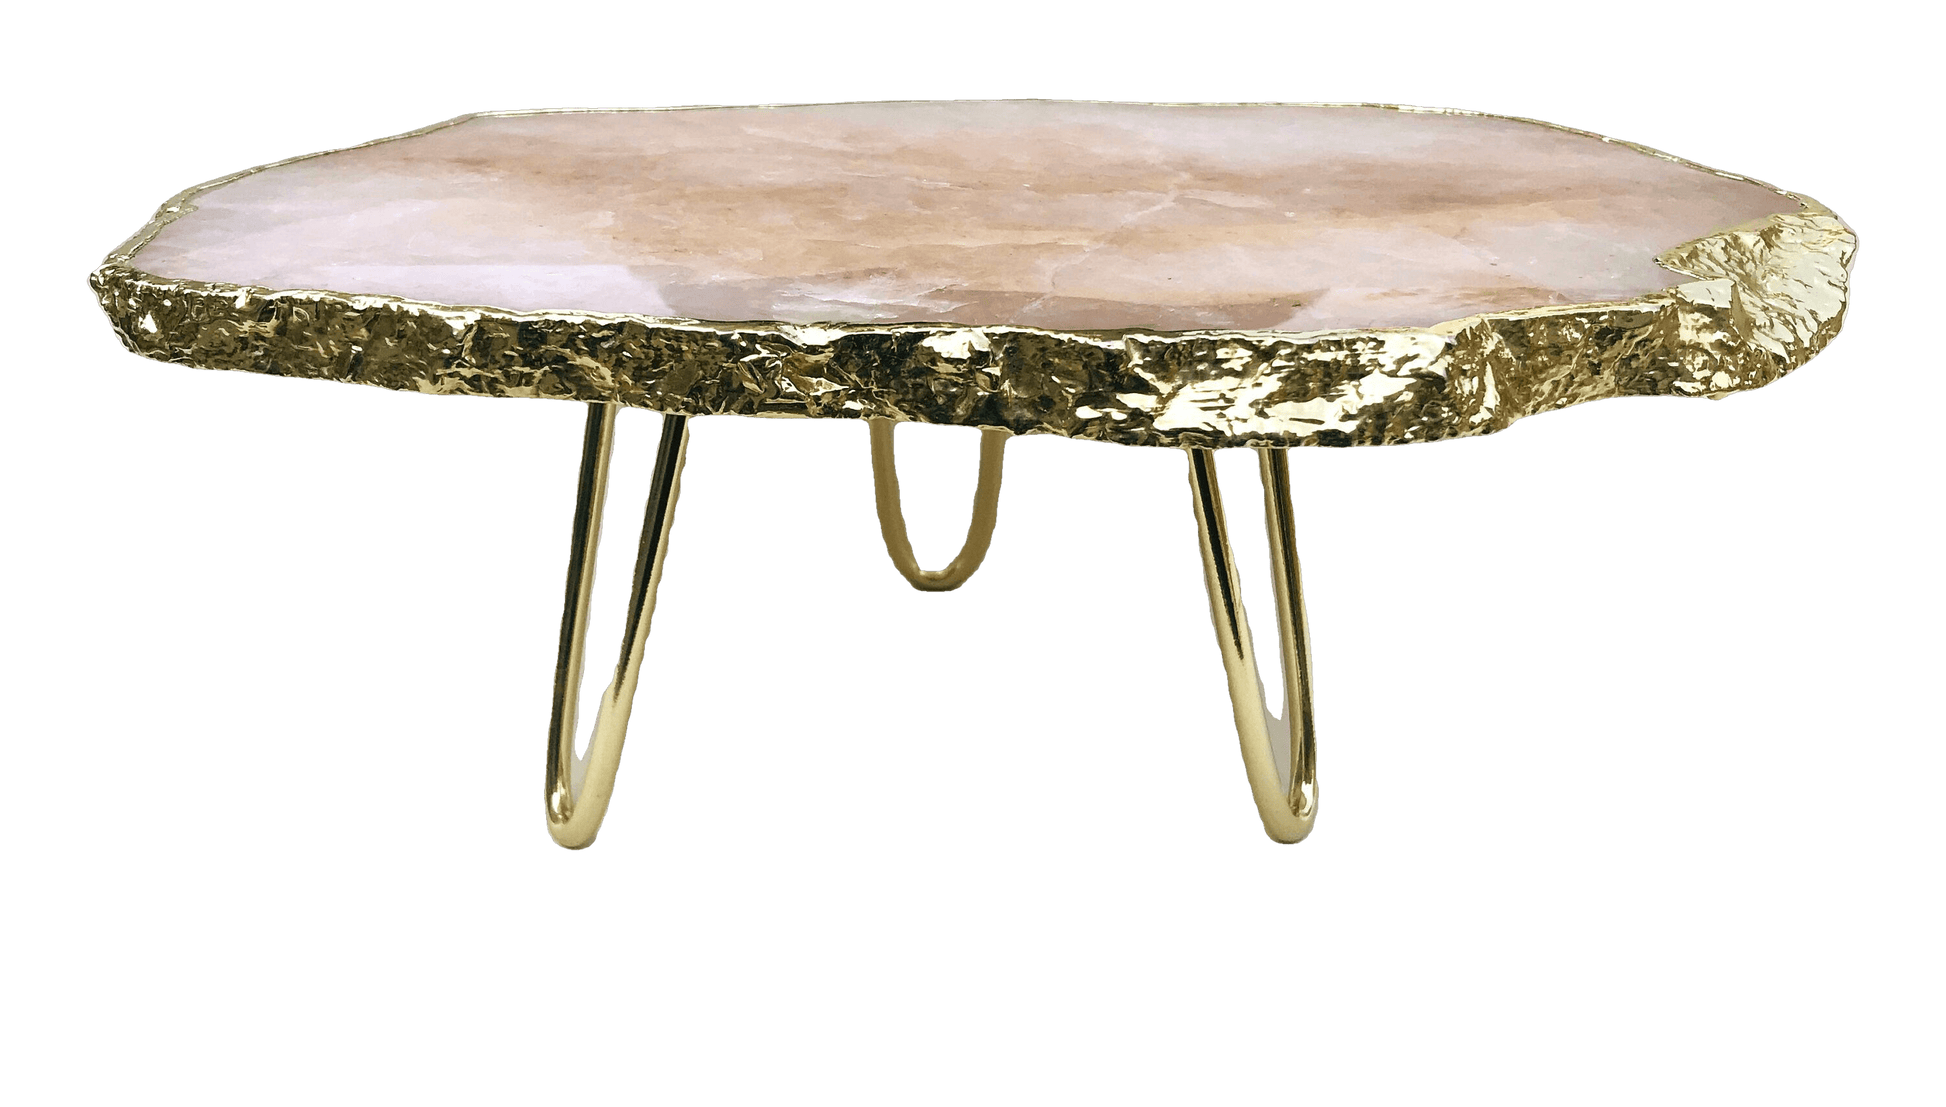 Rose Quartz Agate Cake Stand with Brass Legs - MAIA HOMES